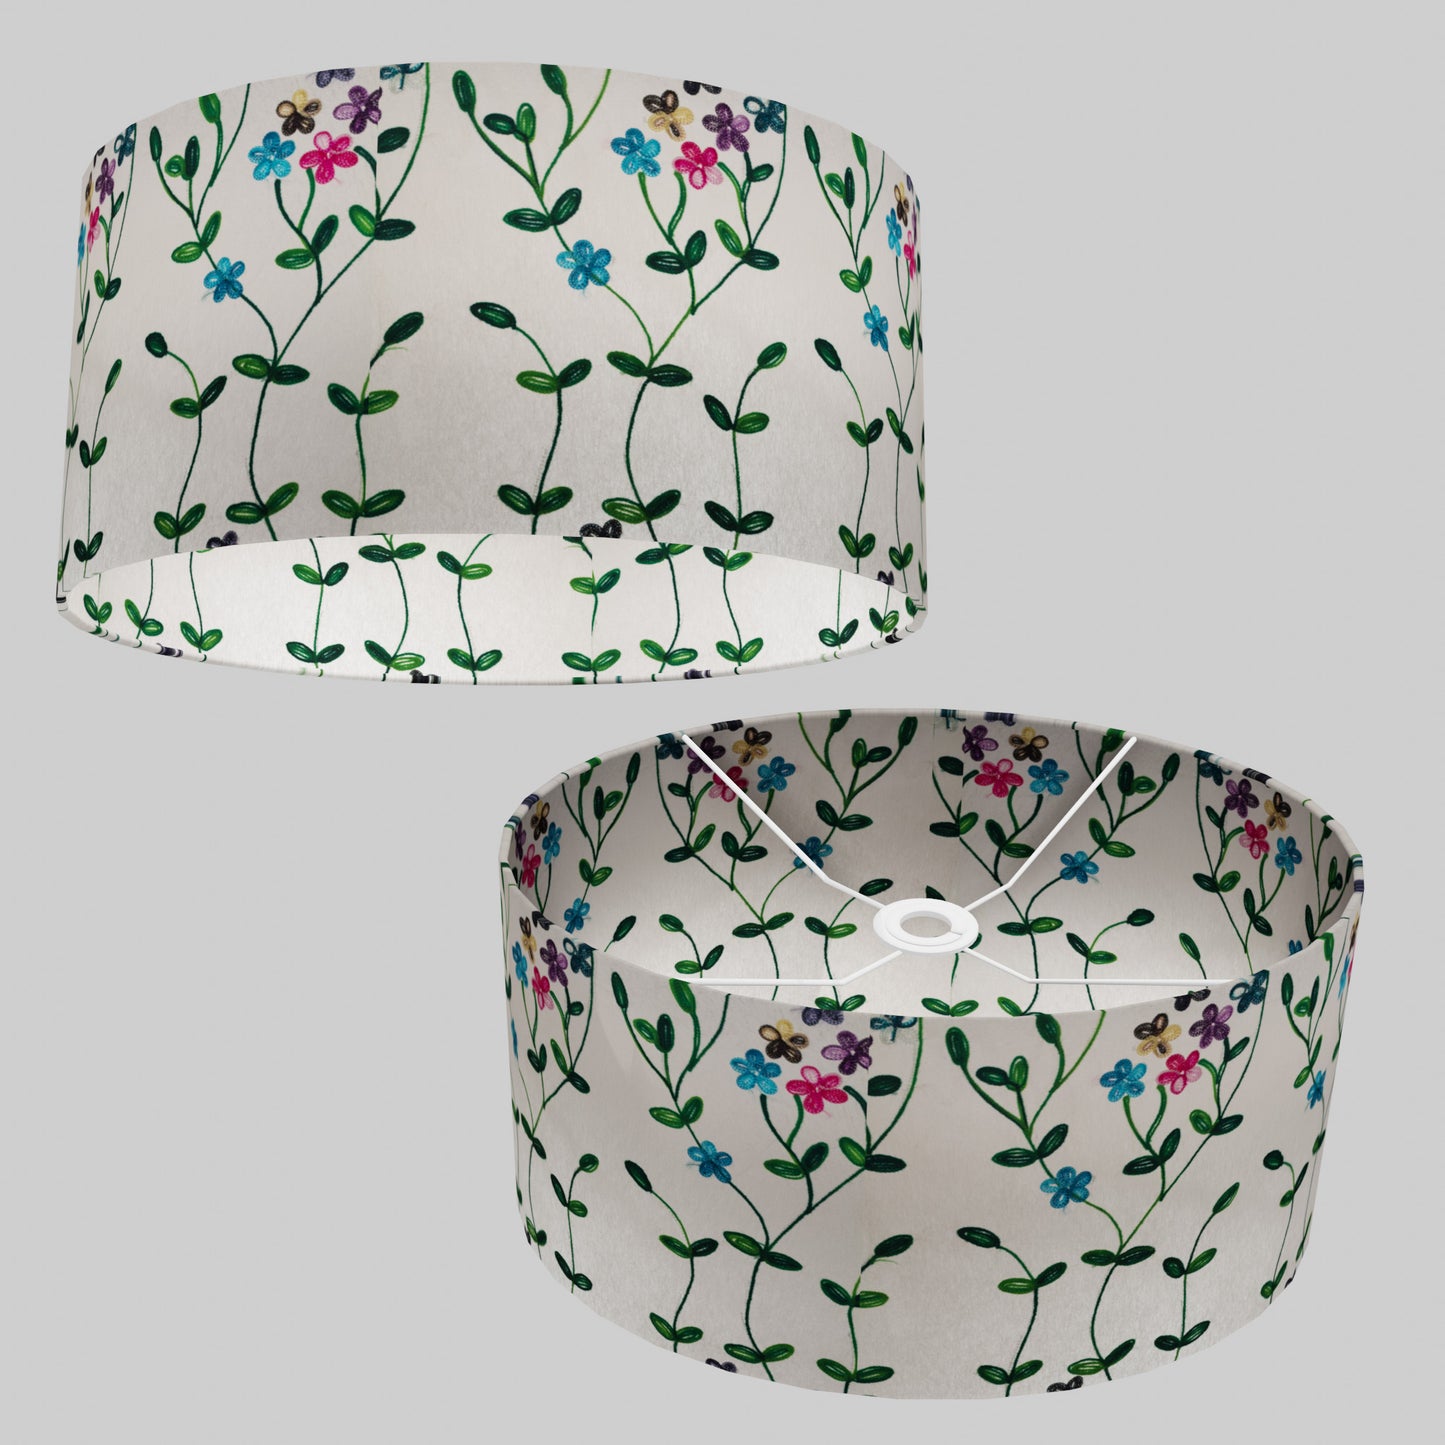 Oval Lamp Shade - P43 - Embroidered Flowers on White, 40cm(w) x 20cm(h) x 30cm(d)